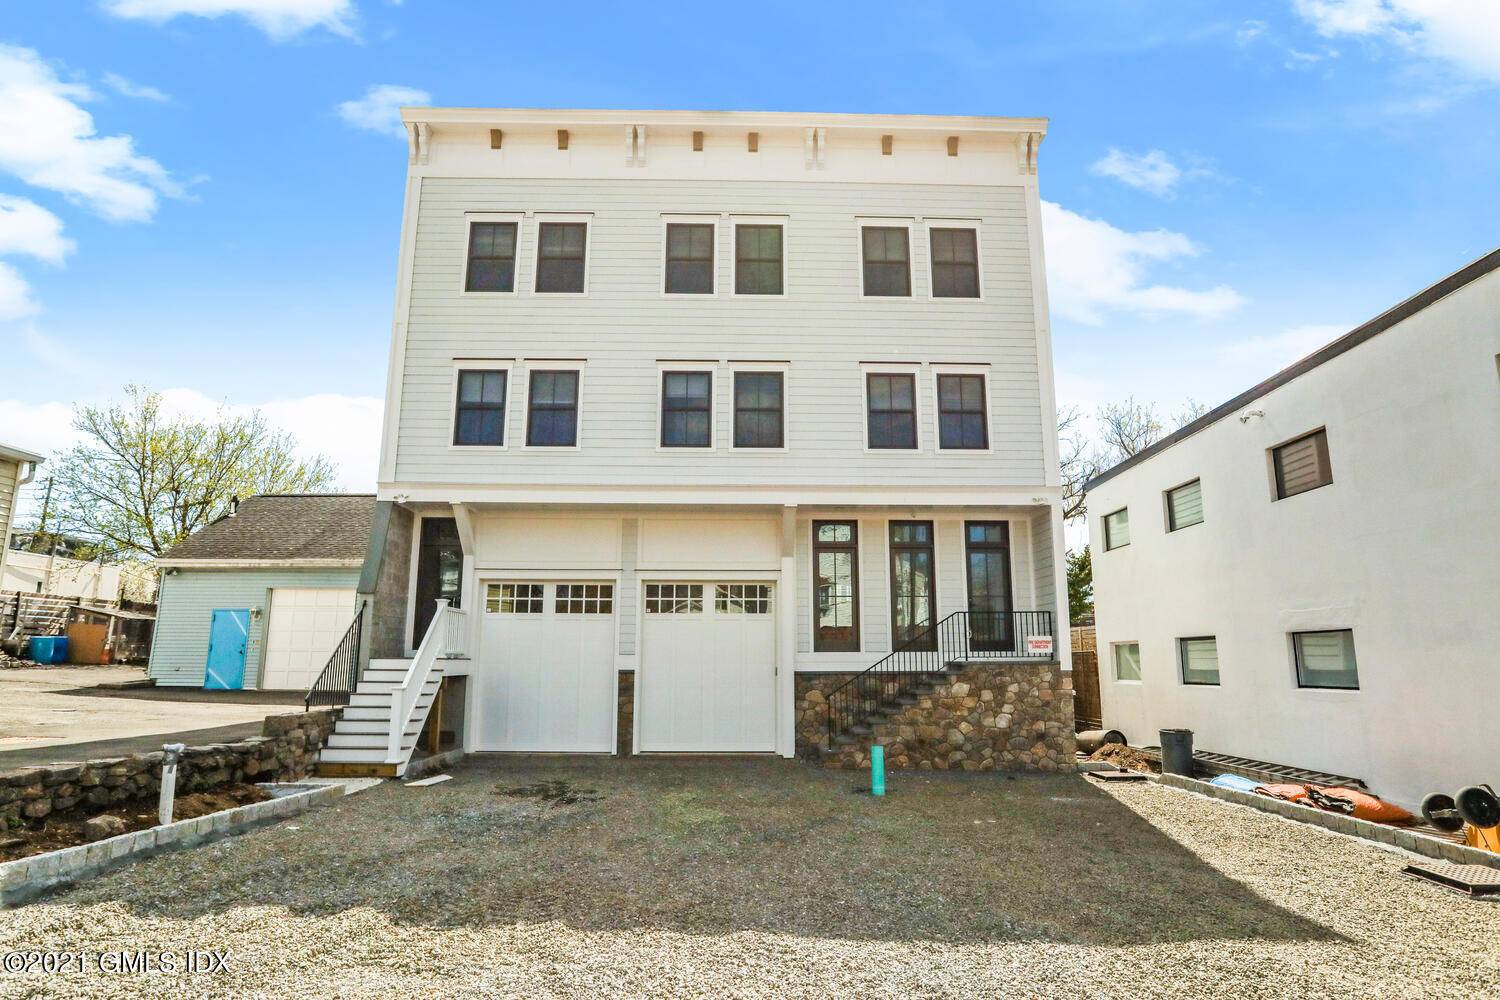 Brand new construction in the heart of downtown Byram, in walking distance to all shops and restaurants in Byram and Pt Chester, with views of the Byram River.